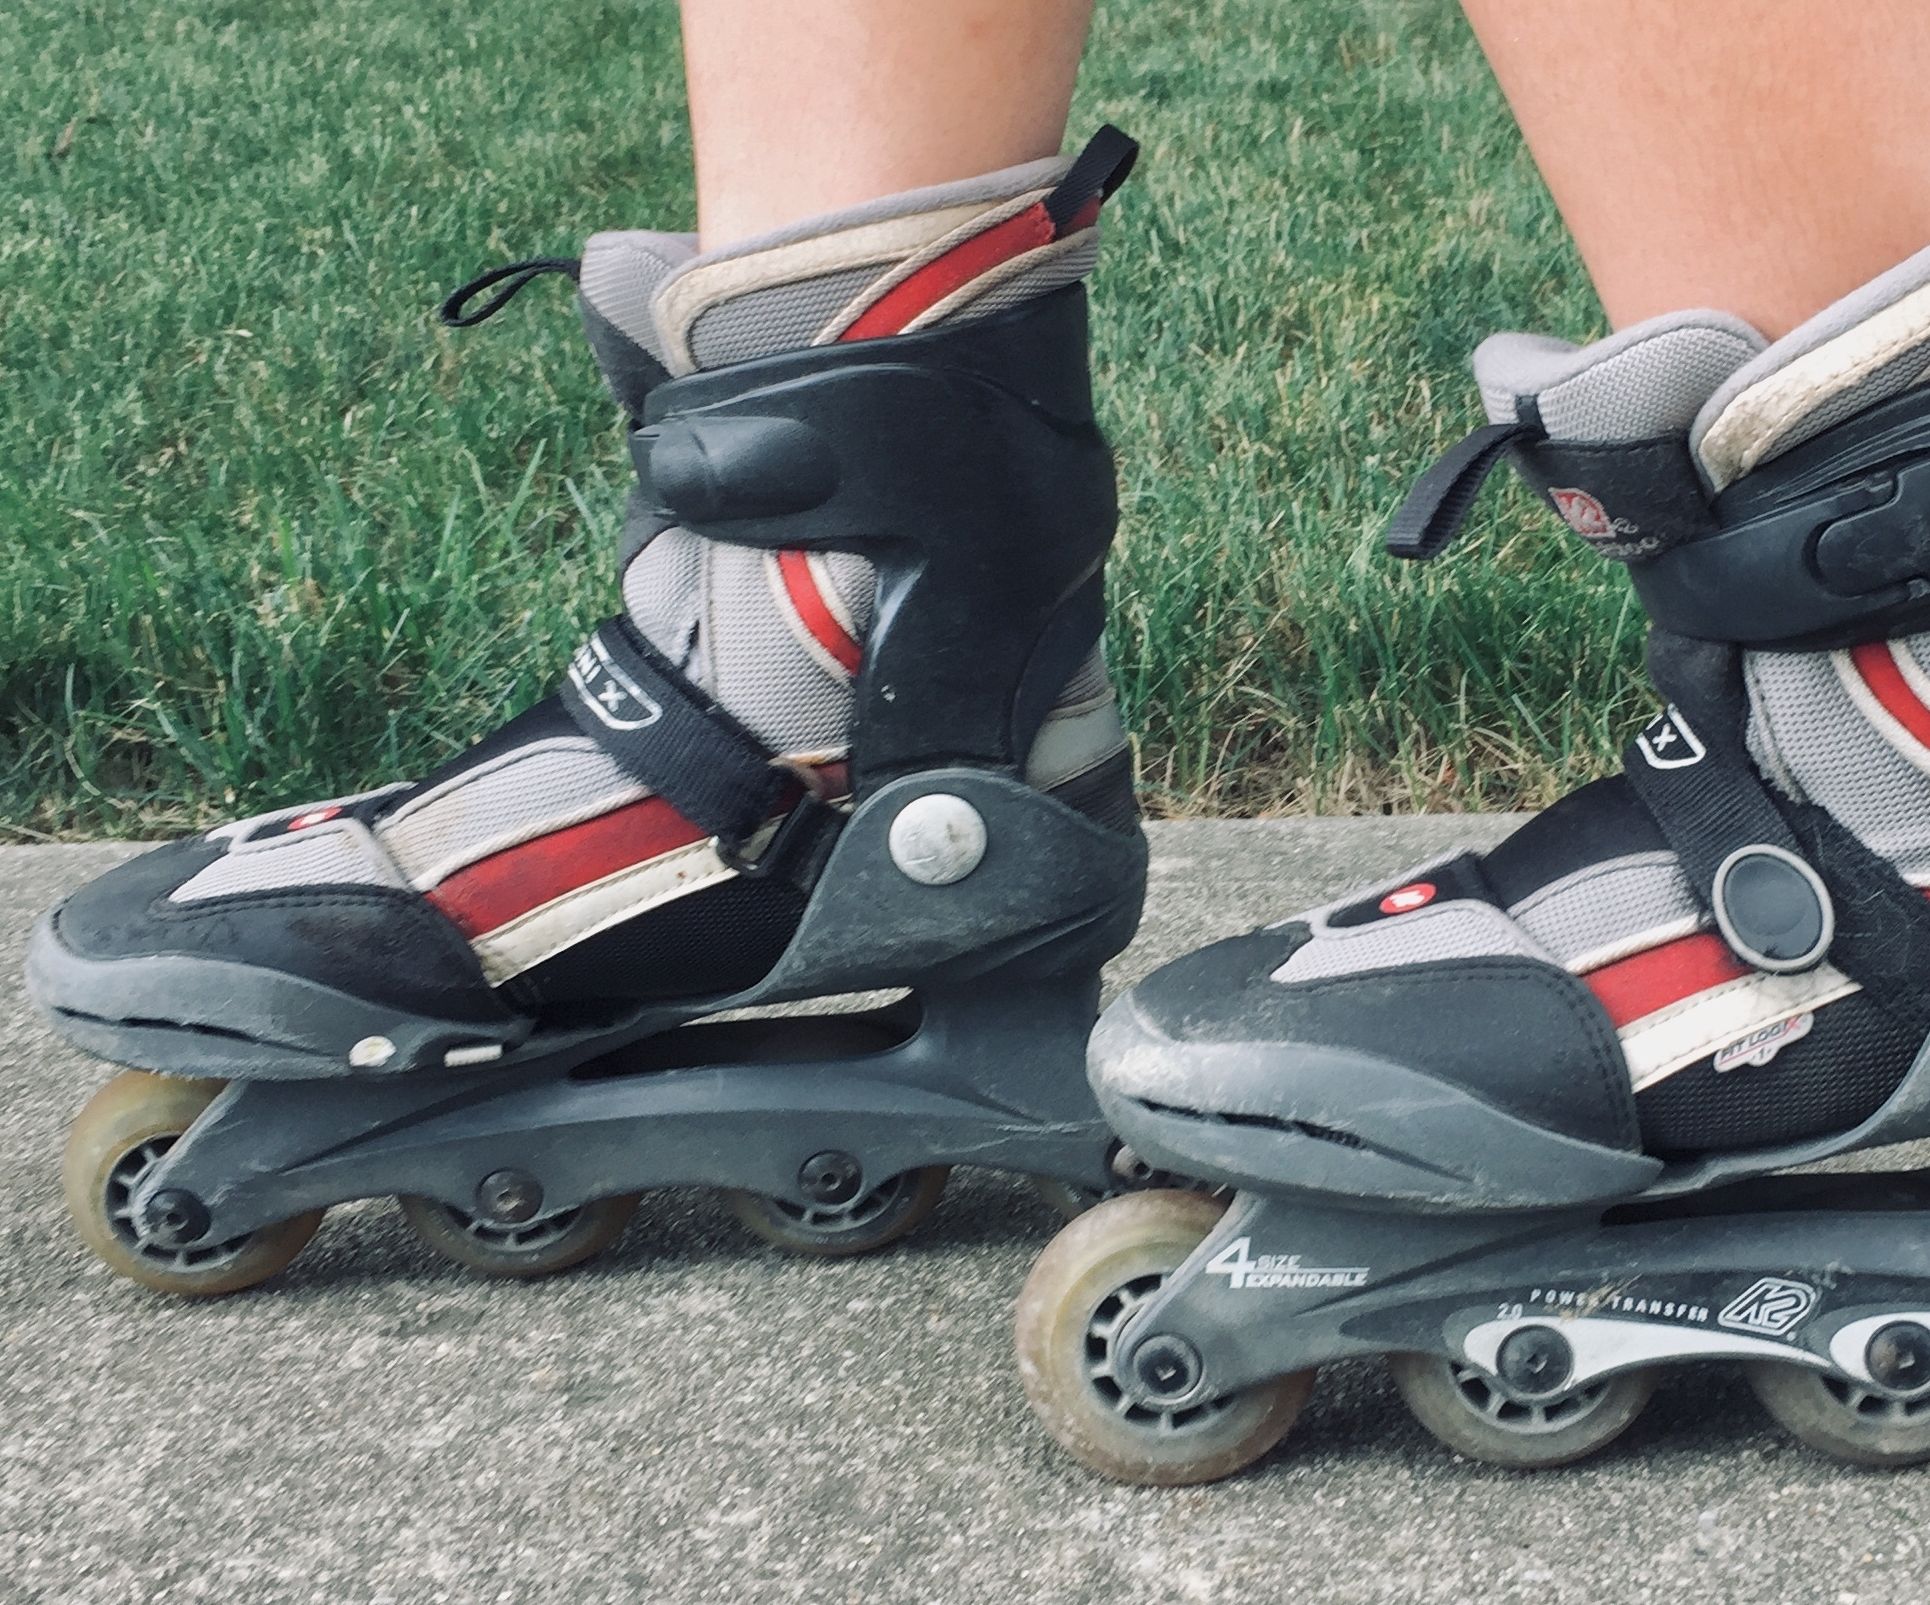 How to Rollerblade (Inline Skating)